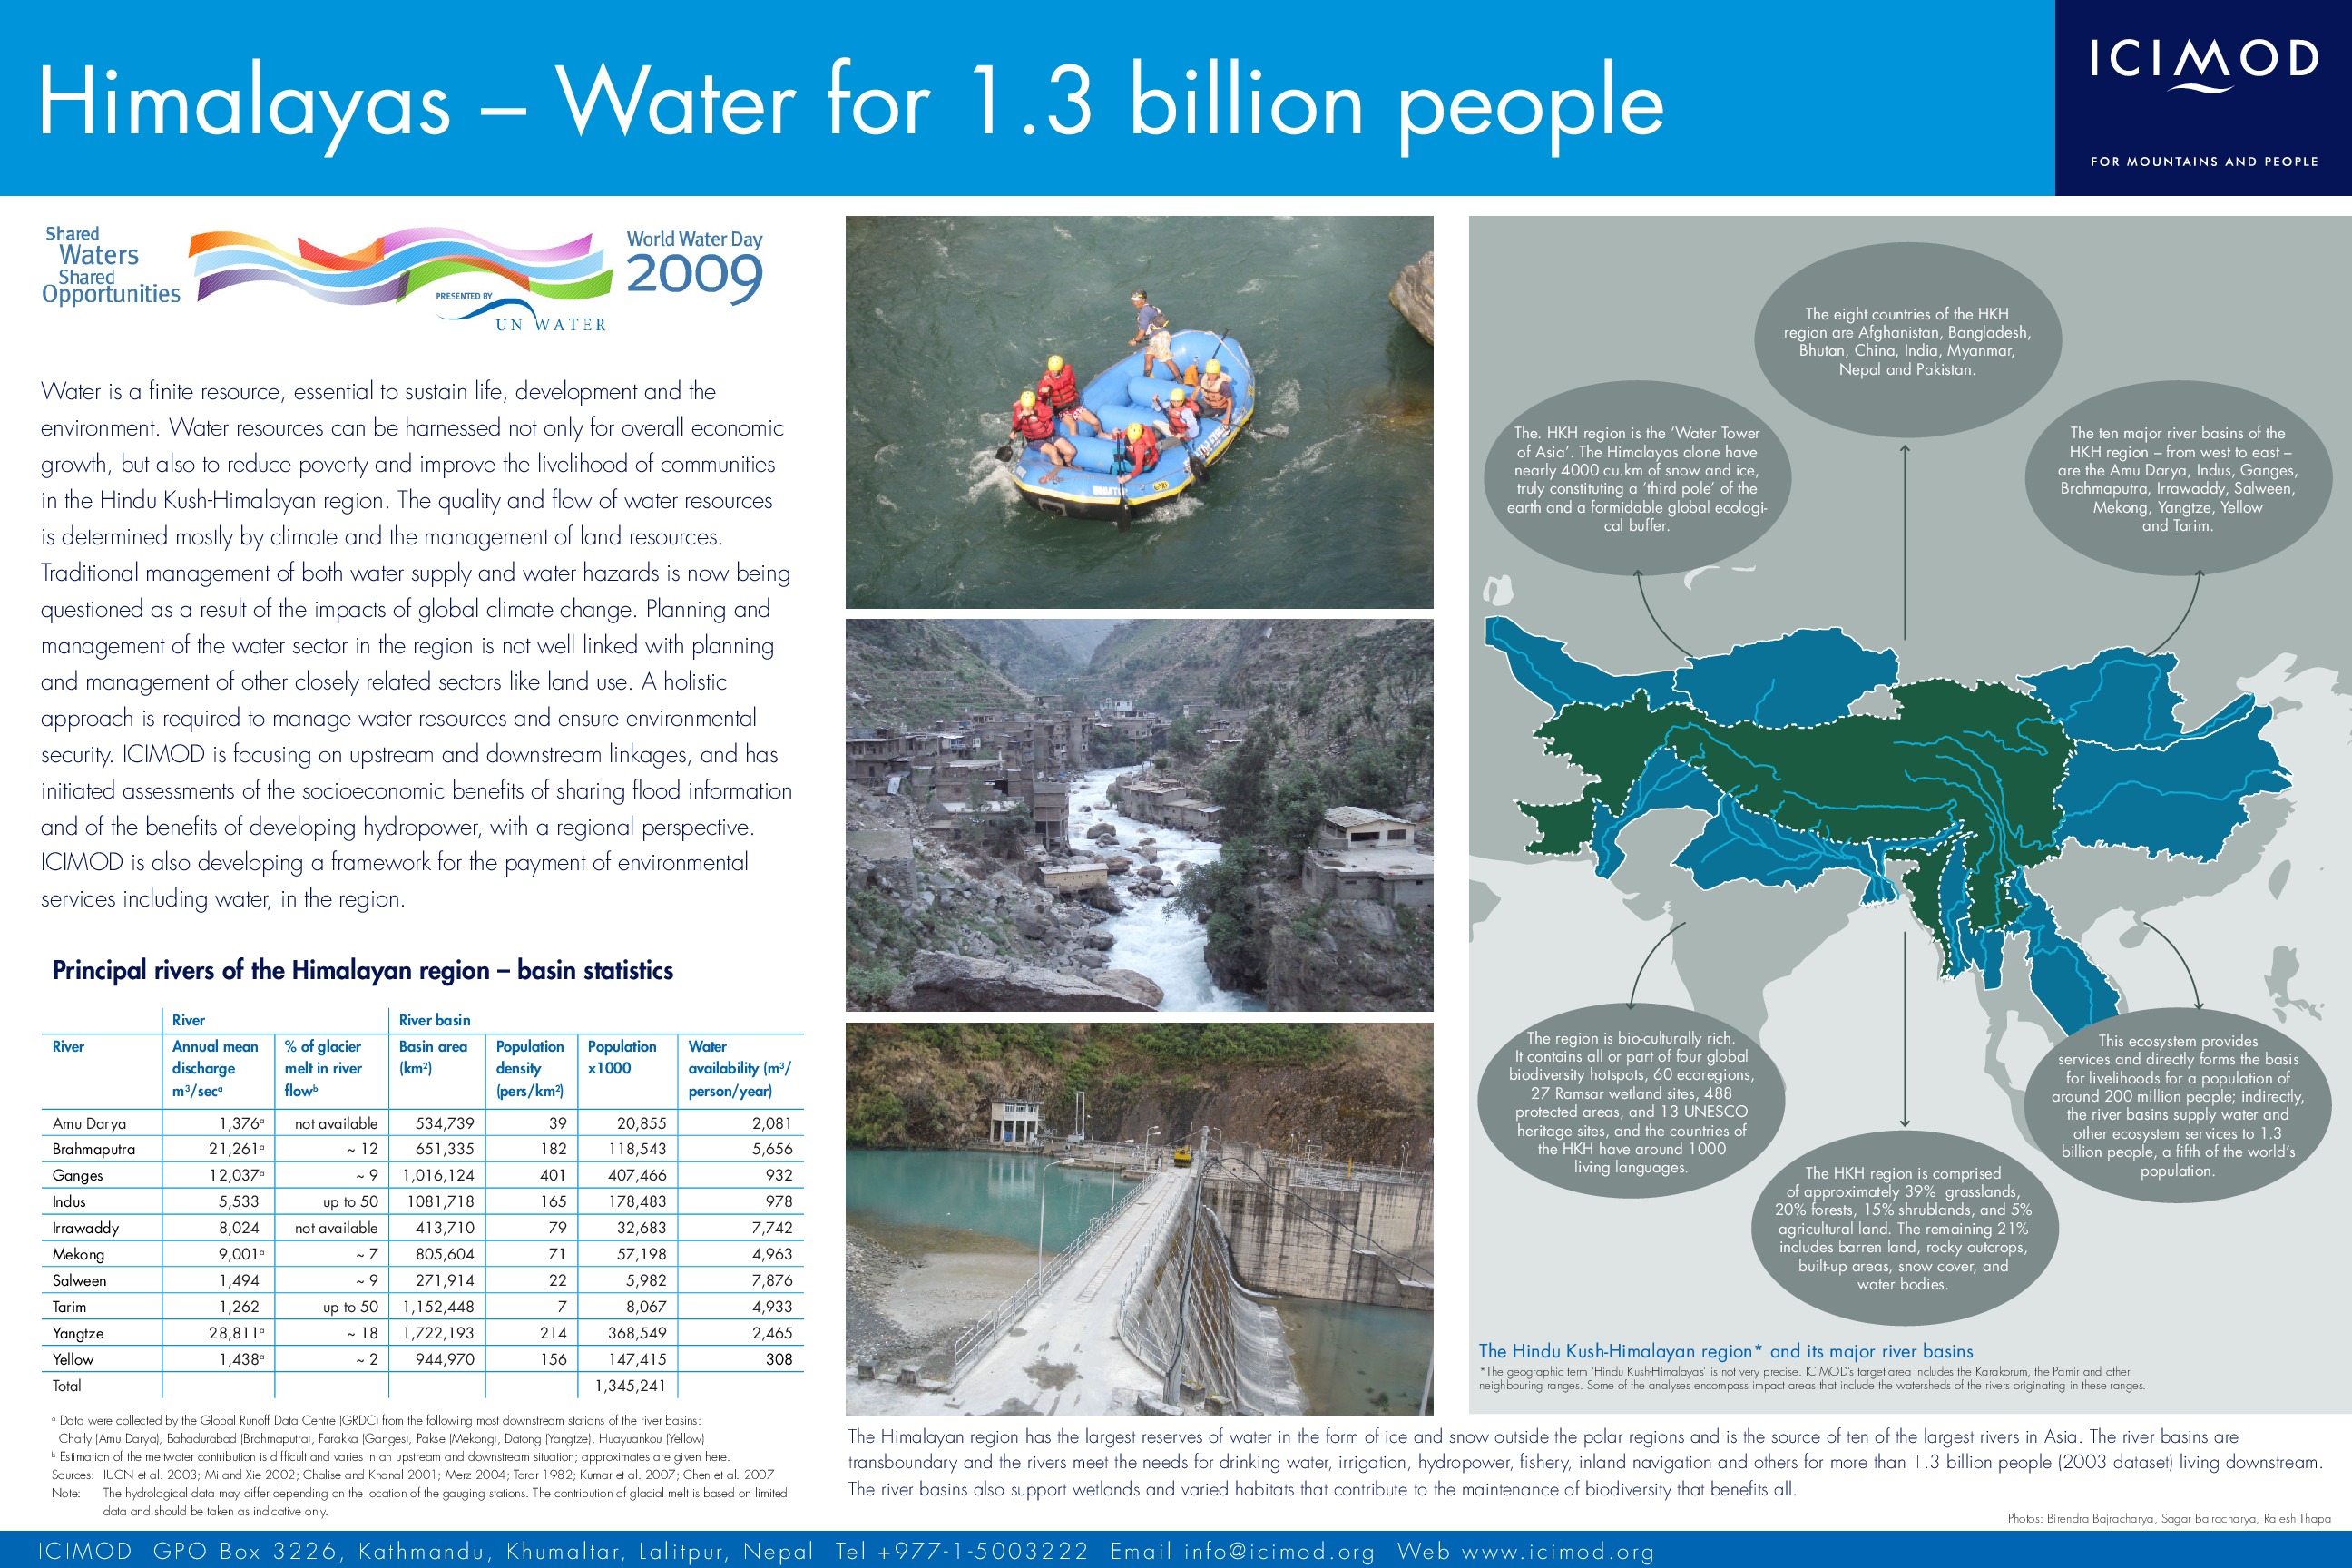 Himalayas – Water for 1.3 Billion People